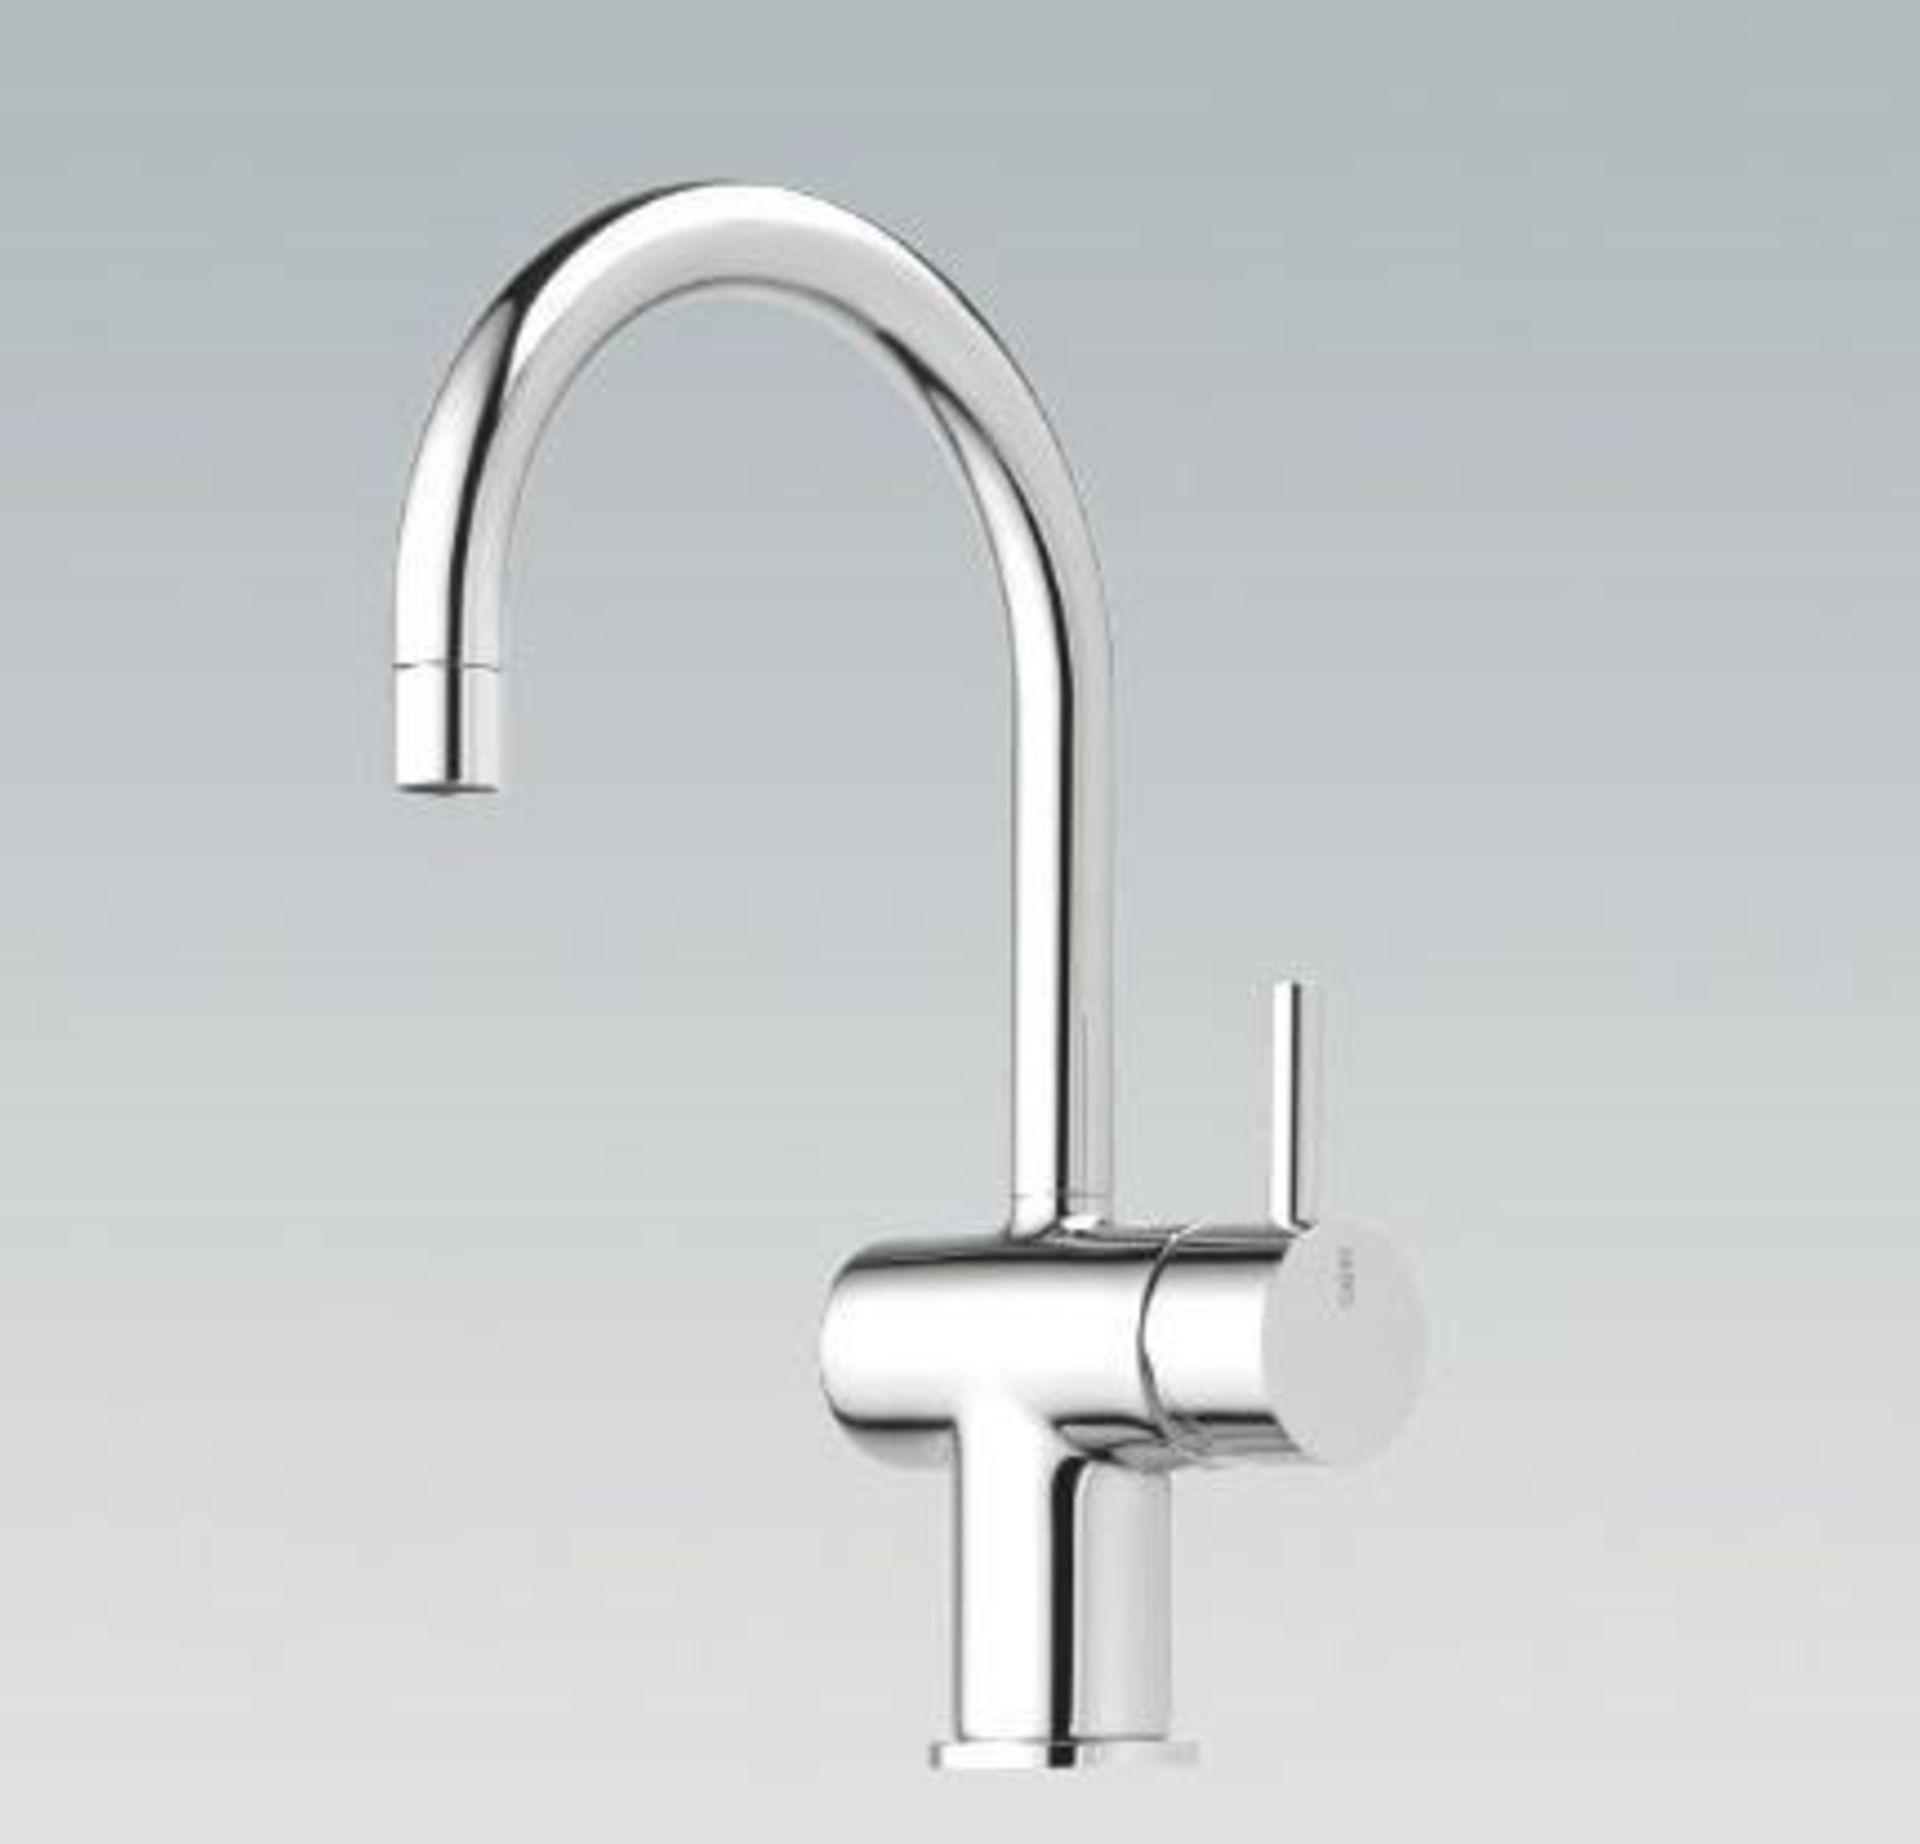 1 x Ideal Standard JADO "Geometry" A1 S/L Basin Mixer Without Waste (F1277AA) - 150mm Projection - C